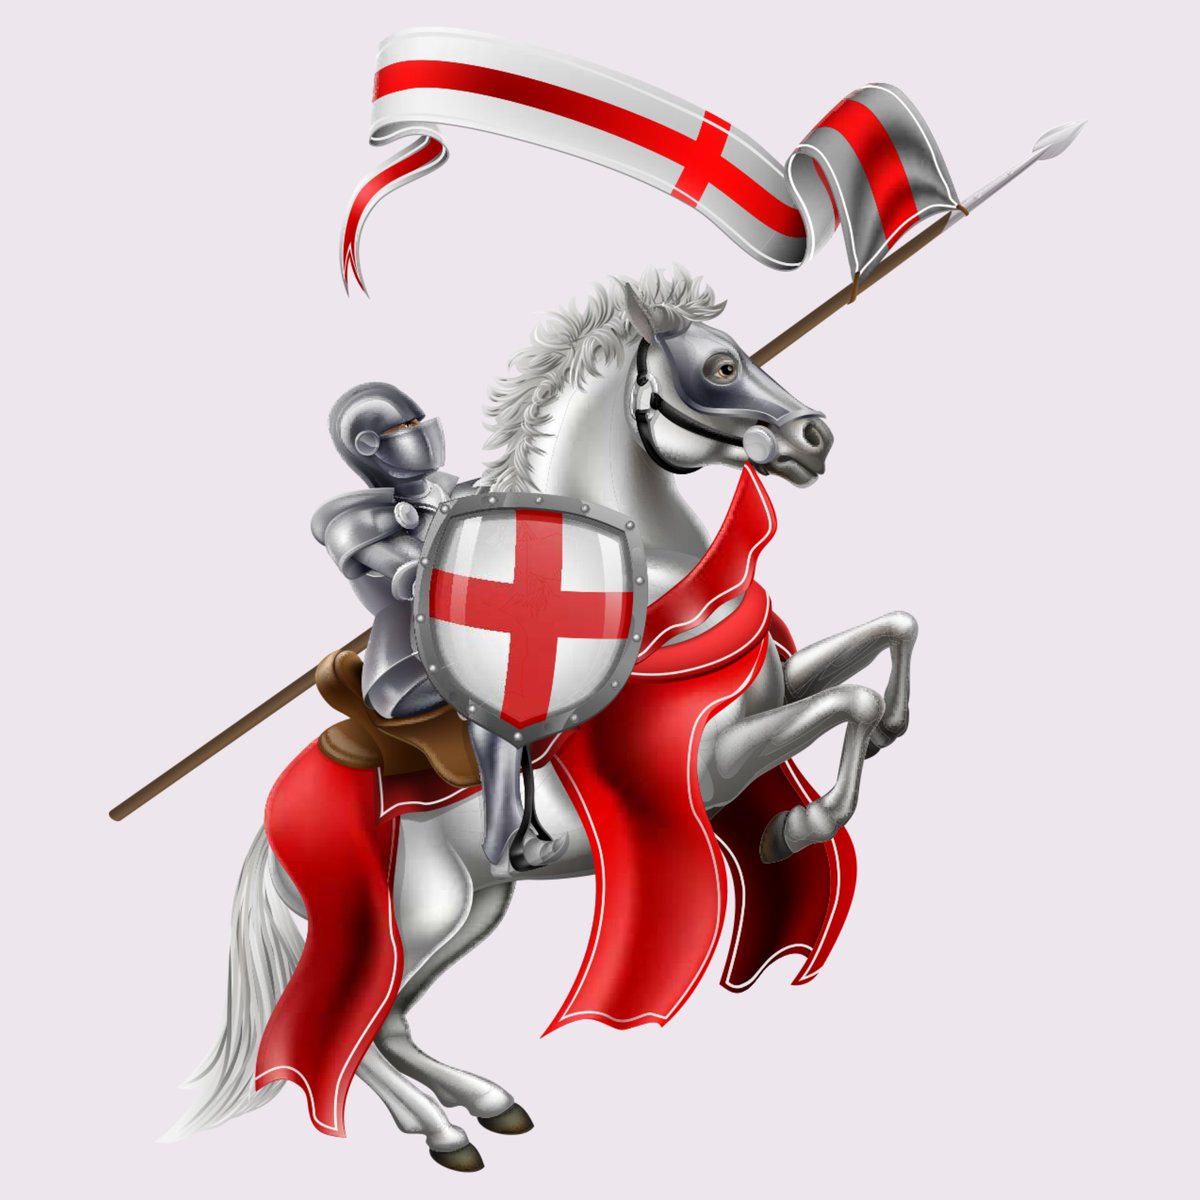 Wishing the FAIRshare communities of Shropshire, South Staffordshire and Telford & Wrekin a happy St George's Day!